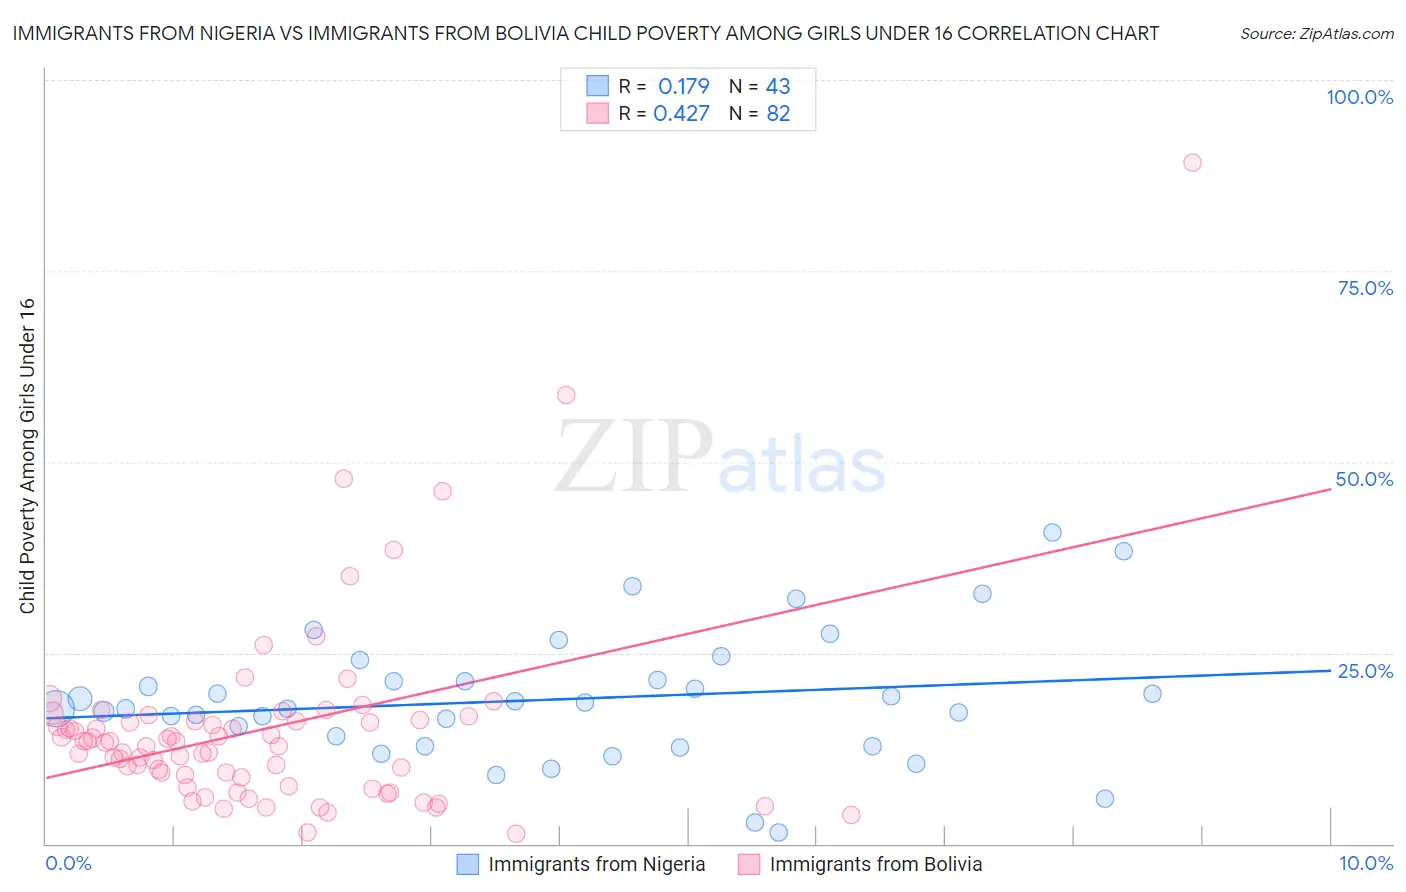 Immigrants from Nigeria vs Immigrants from Bolivia Child Poverty Among Girls Under 16